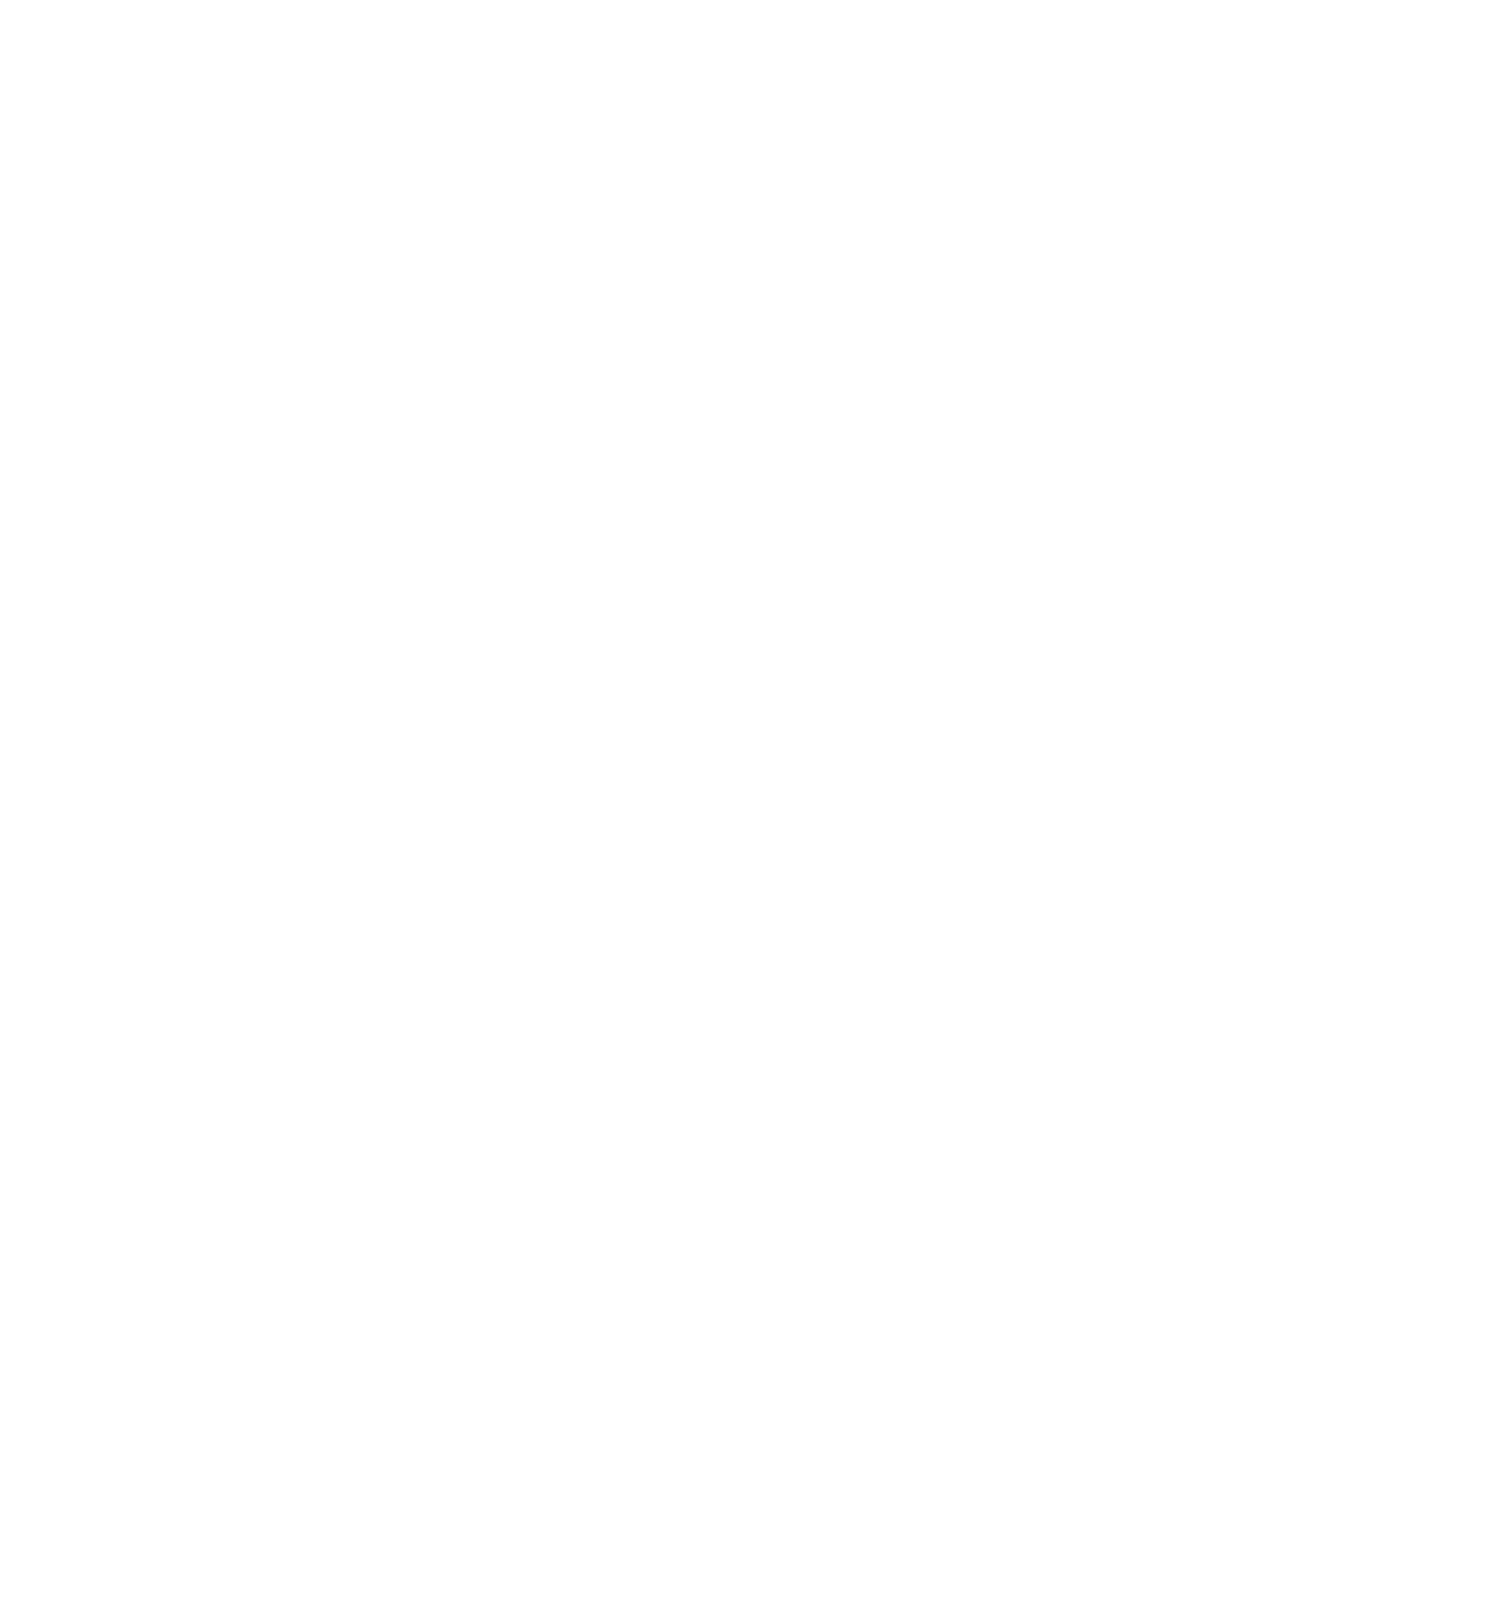 Copacetic Counseling